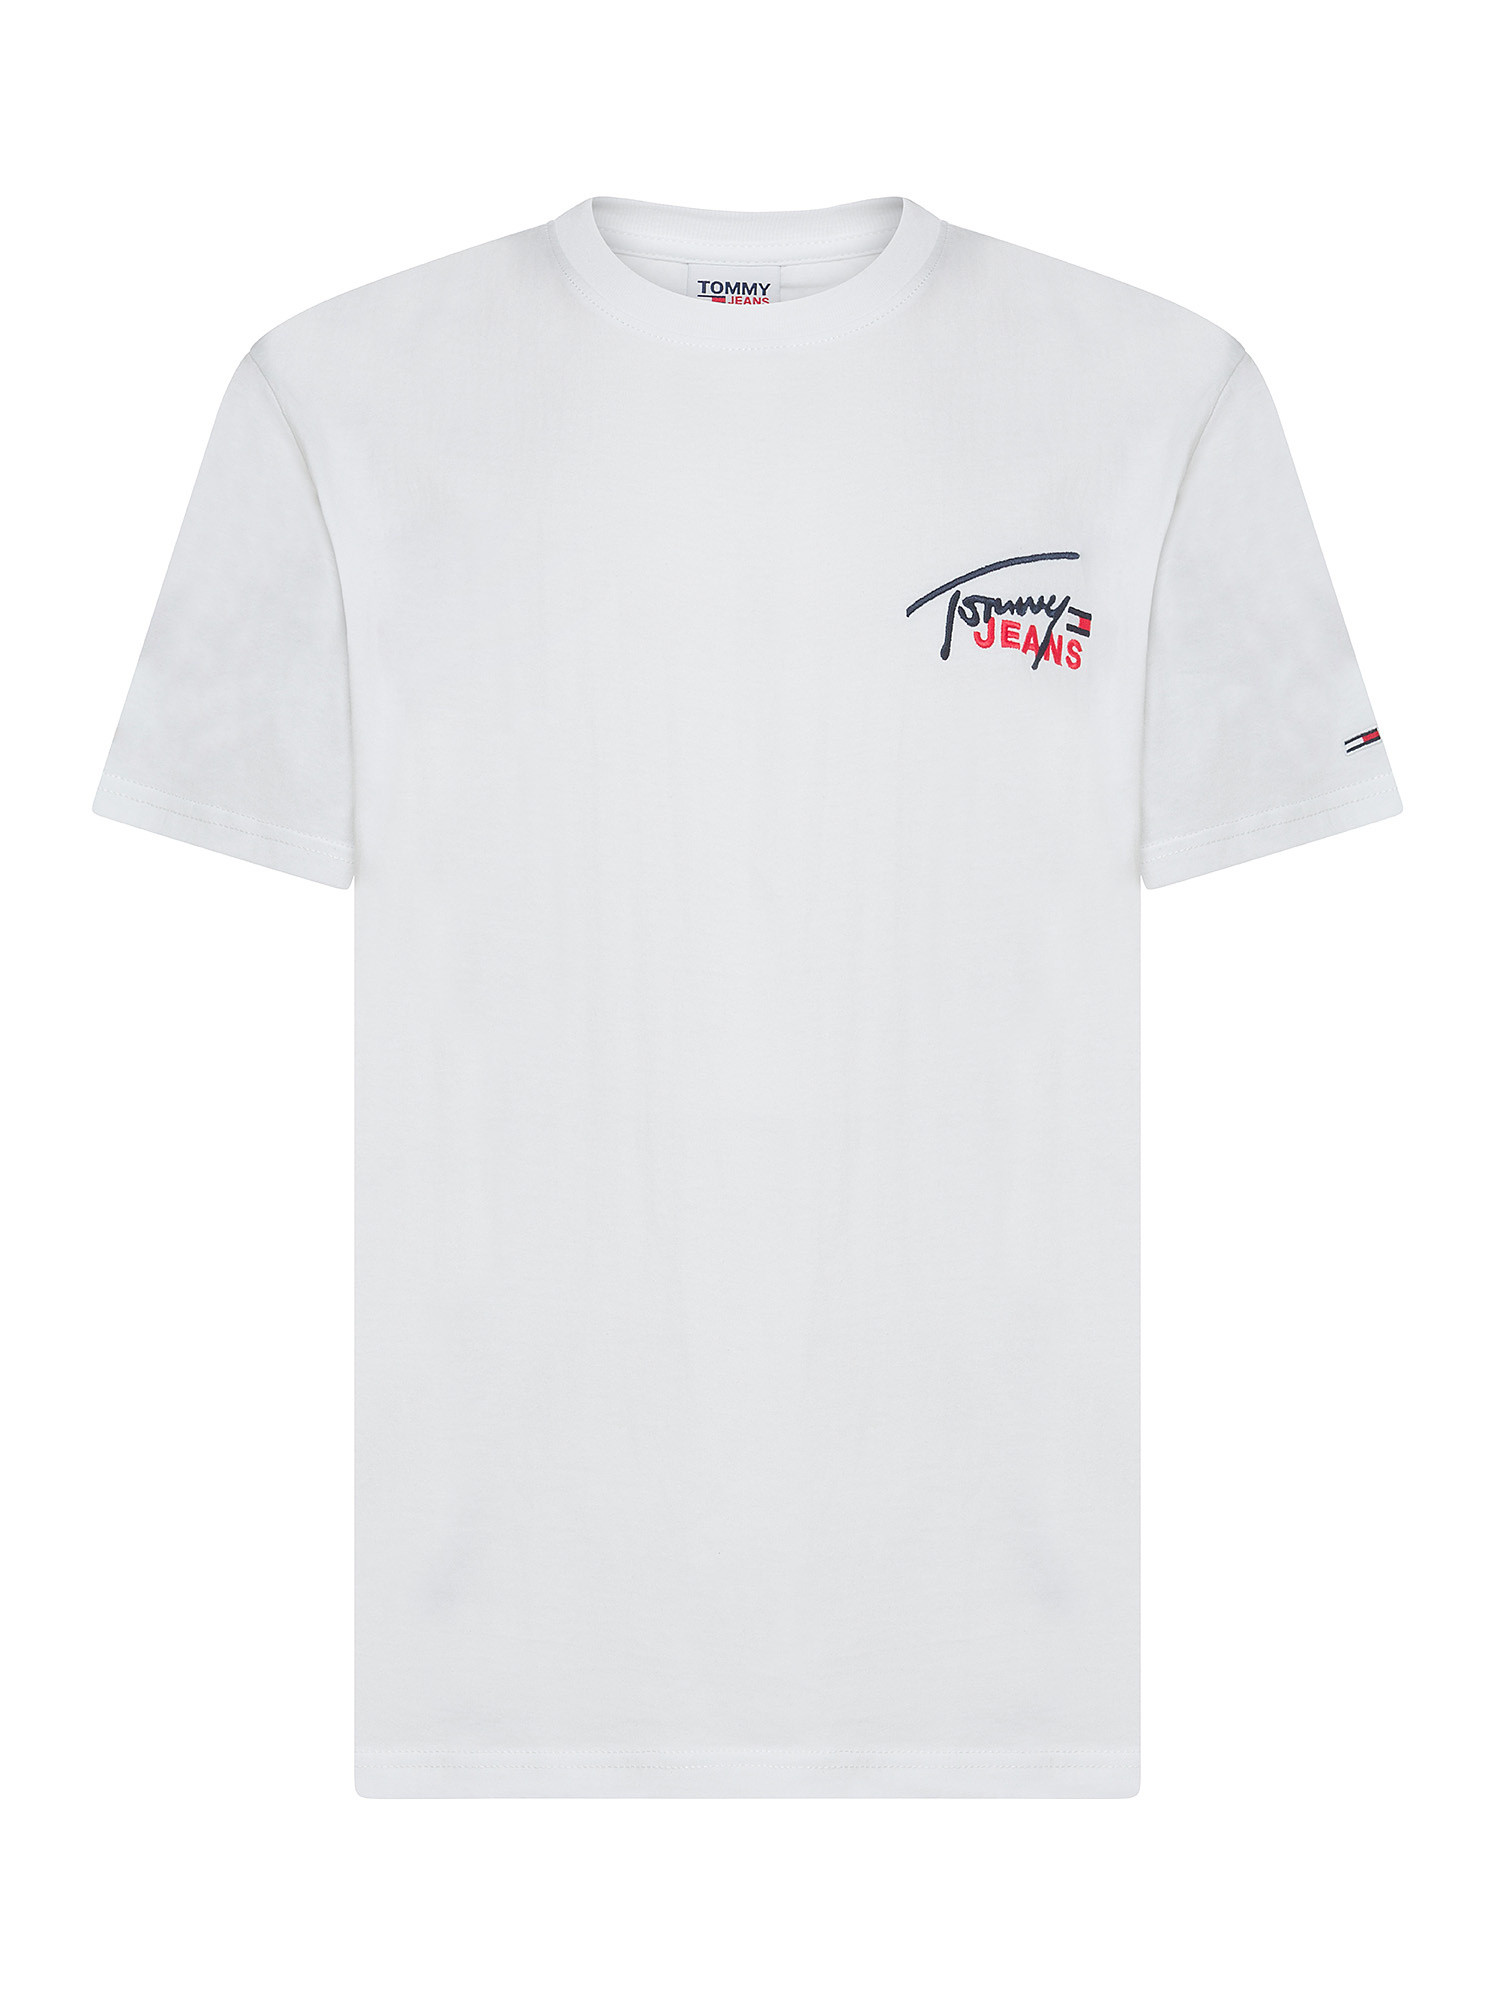 Tommy Jeans - T-shirt girocollo in cotone con logo ricamato, Bianco, large image number 0